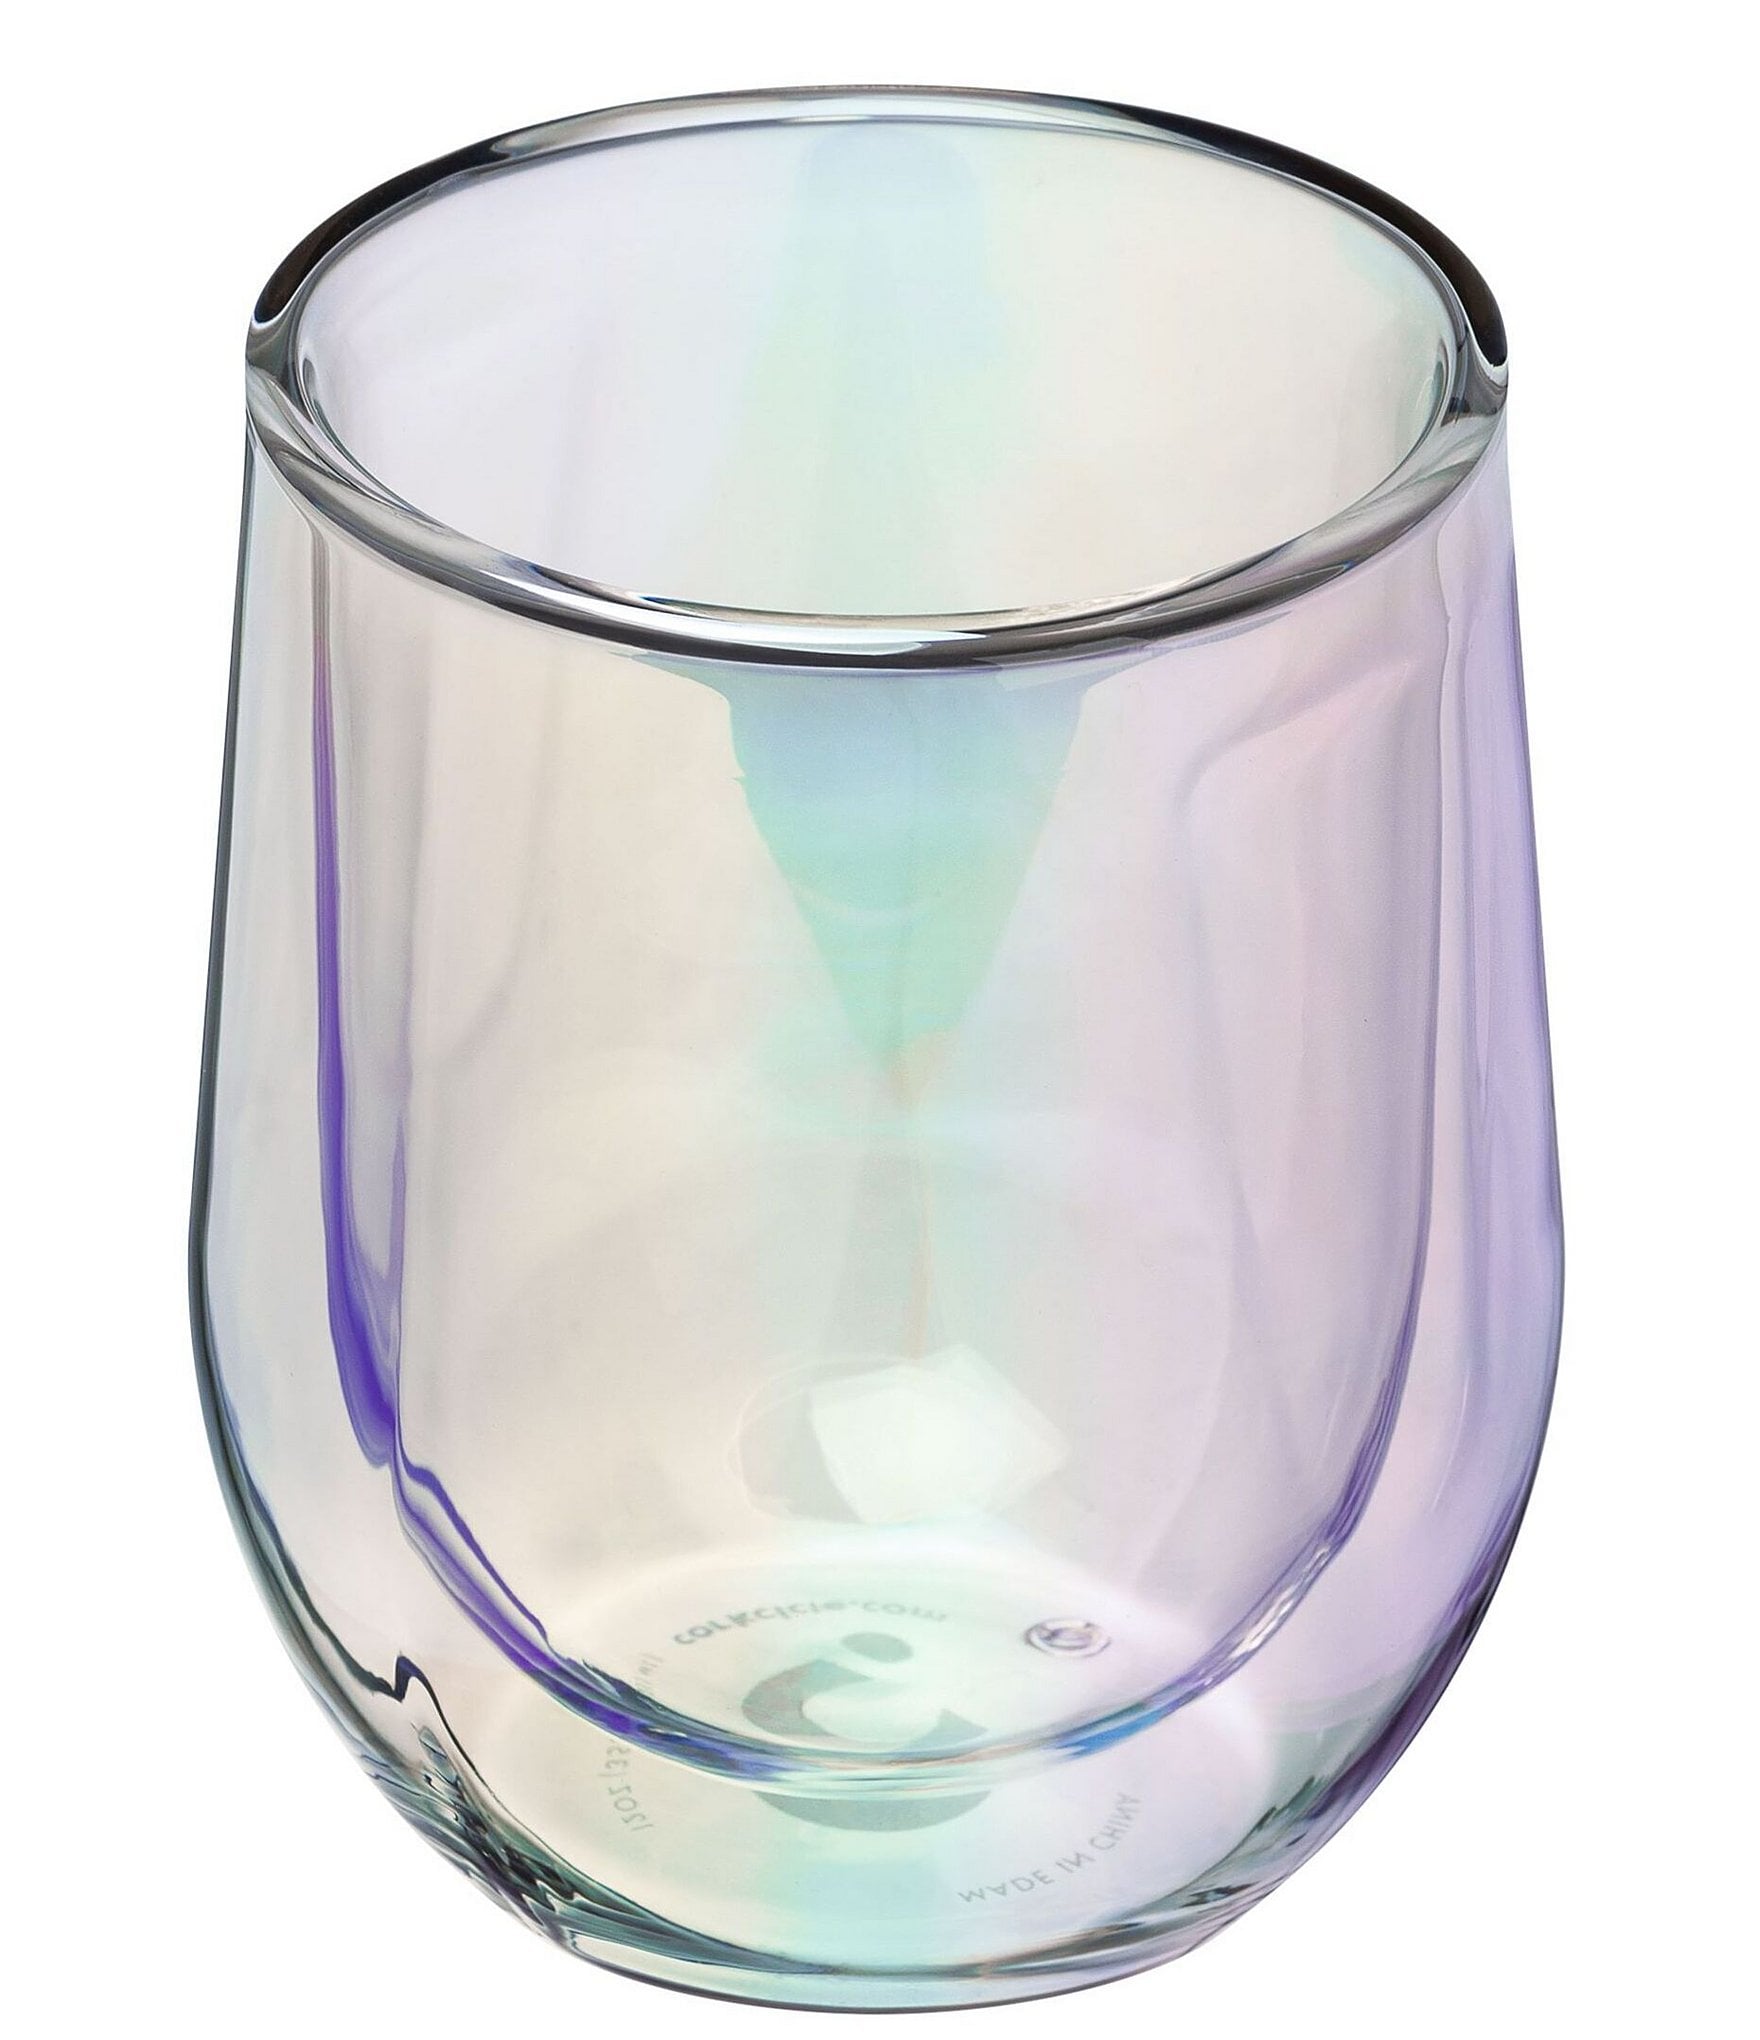 https://dimg.dillards.com/is/image/DillardsZoom/zoom/corkcicle-double-walled-insulated-prism-stemless-wine-glass/00000000_zi_20383829.jpg